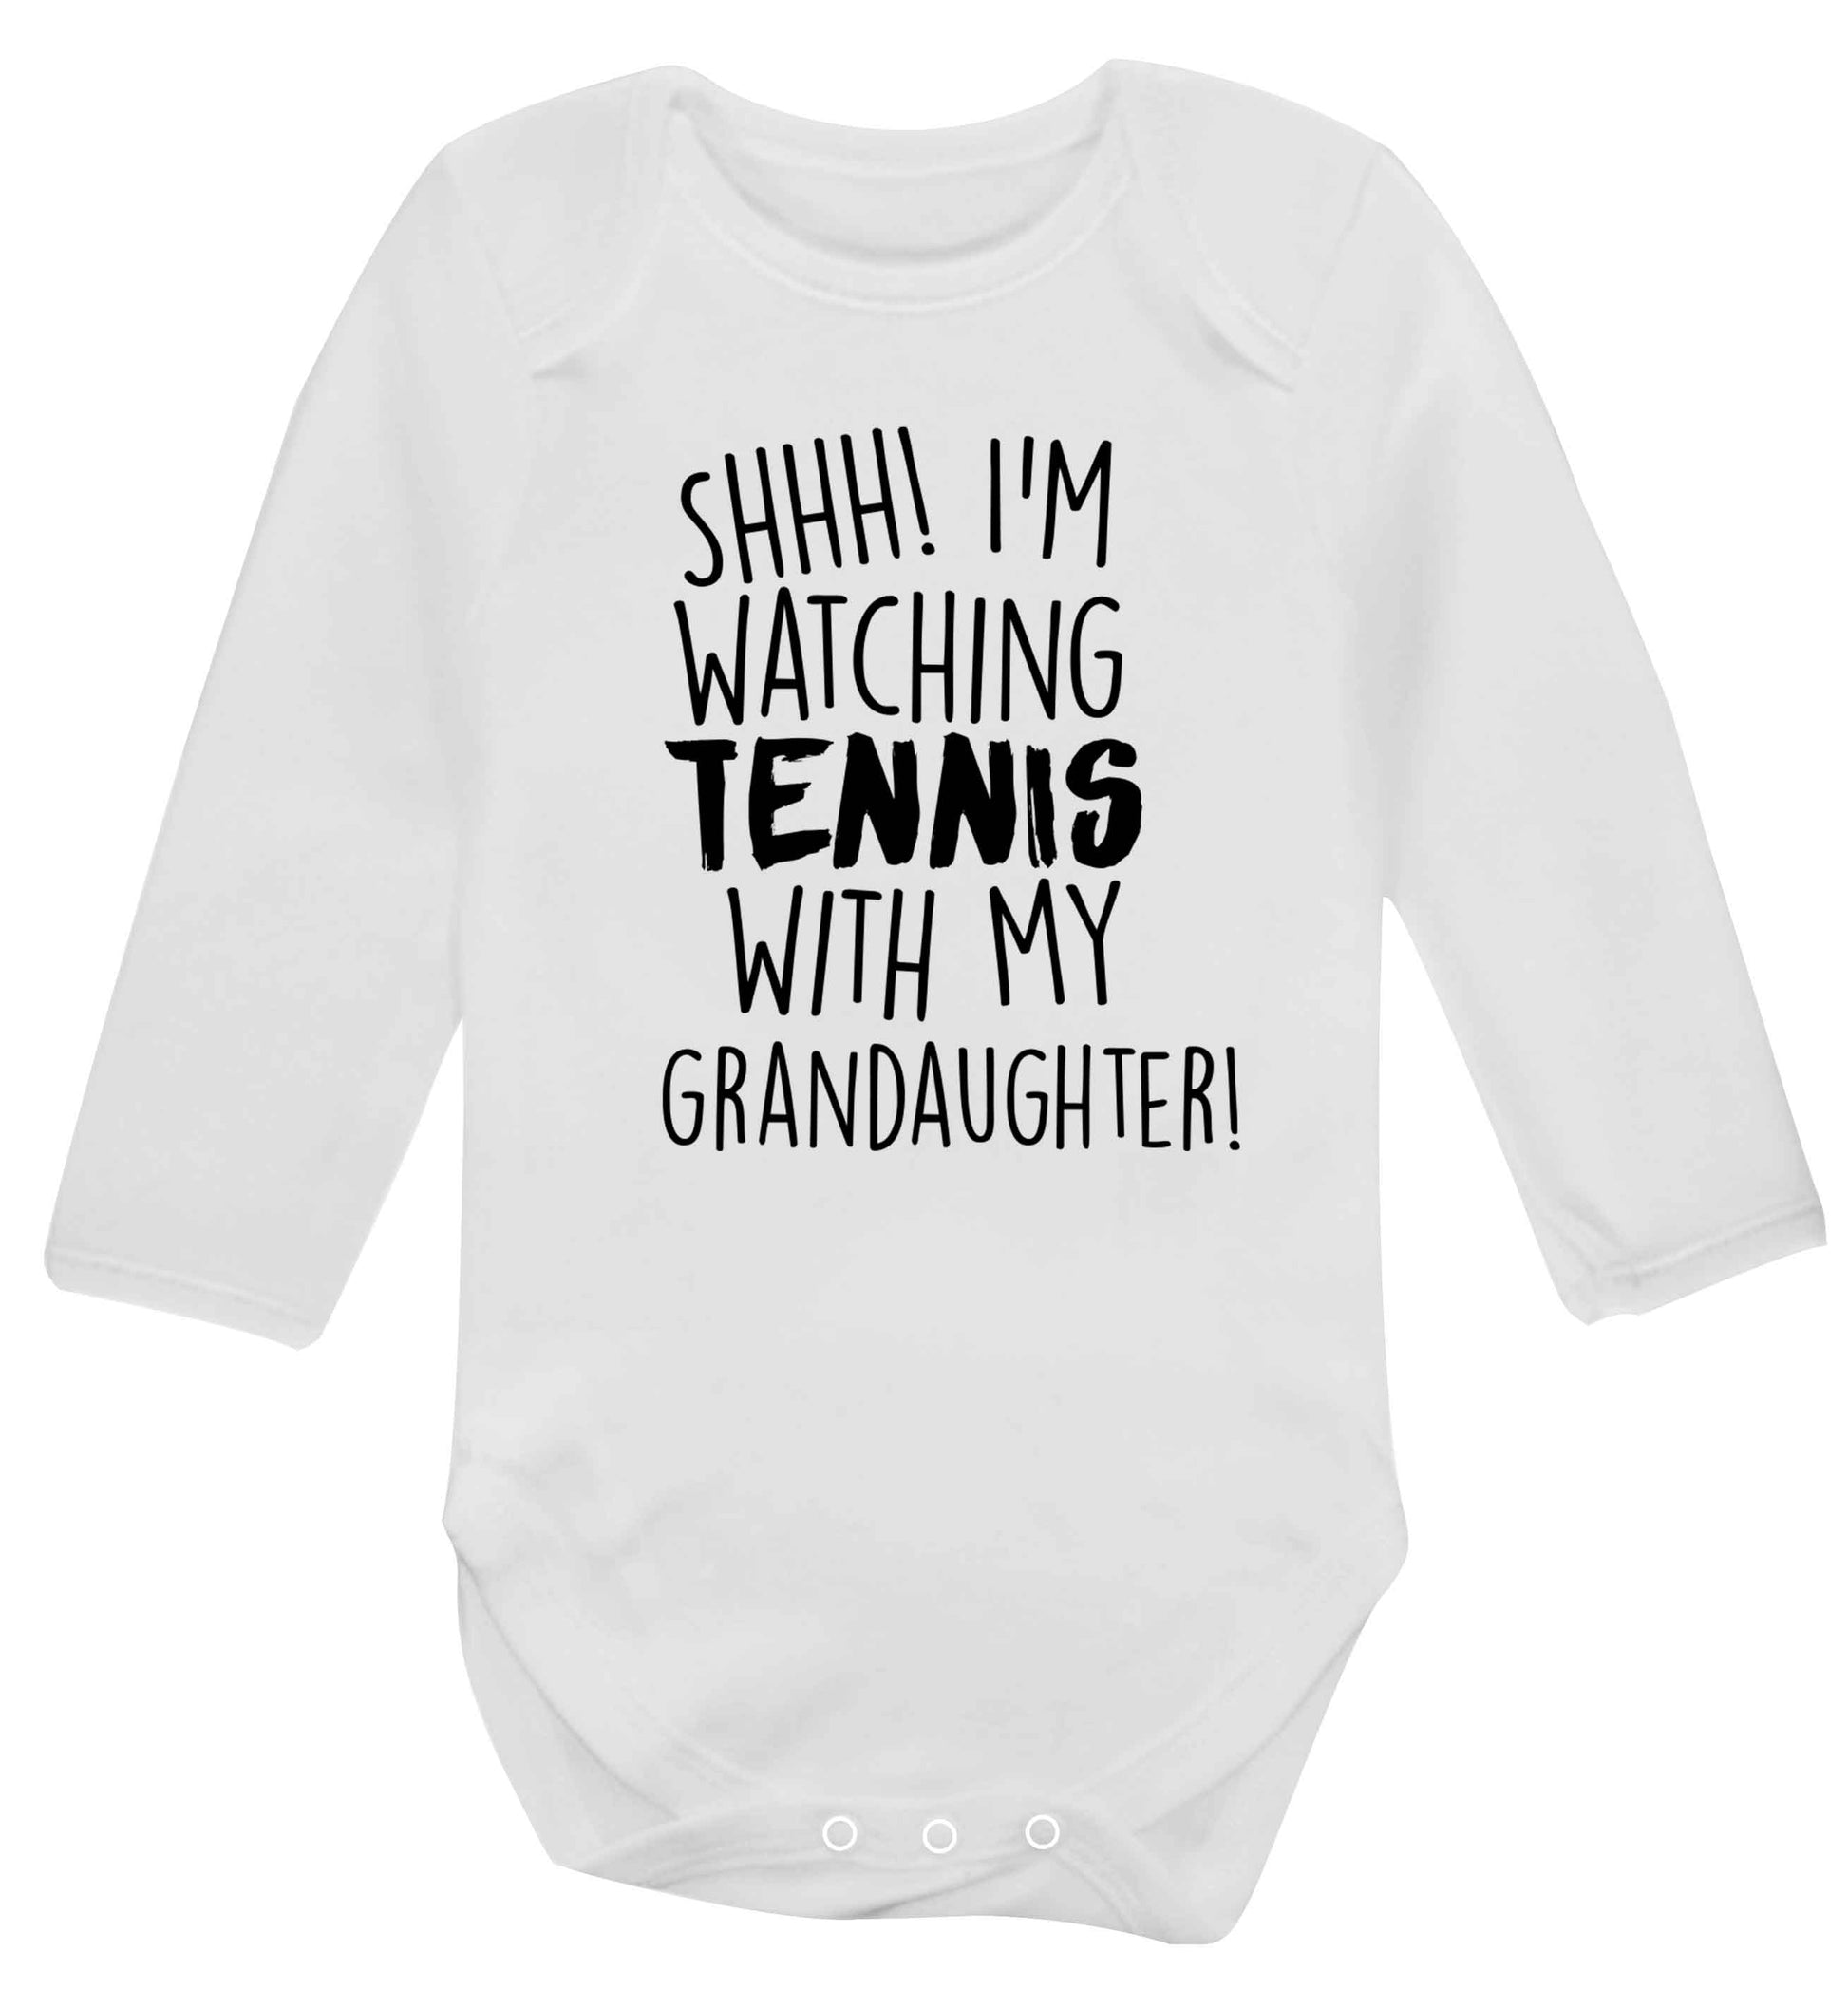 Shh! I'm watching tennis with my granddaughter! Baby Vest long sleeved white 6-12 months